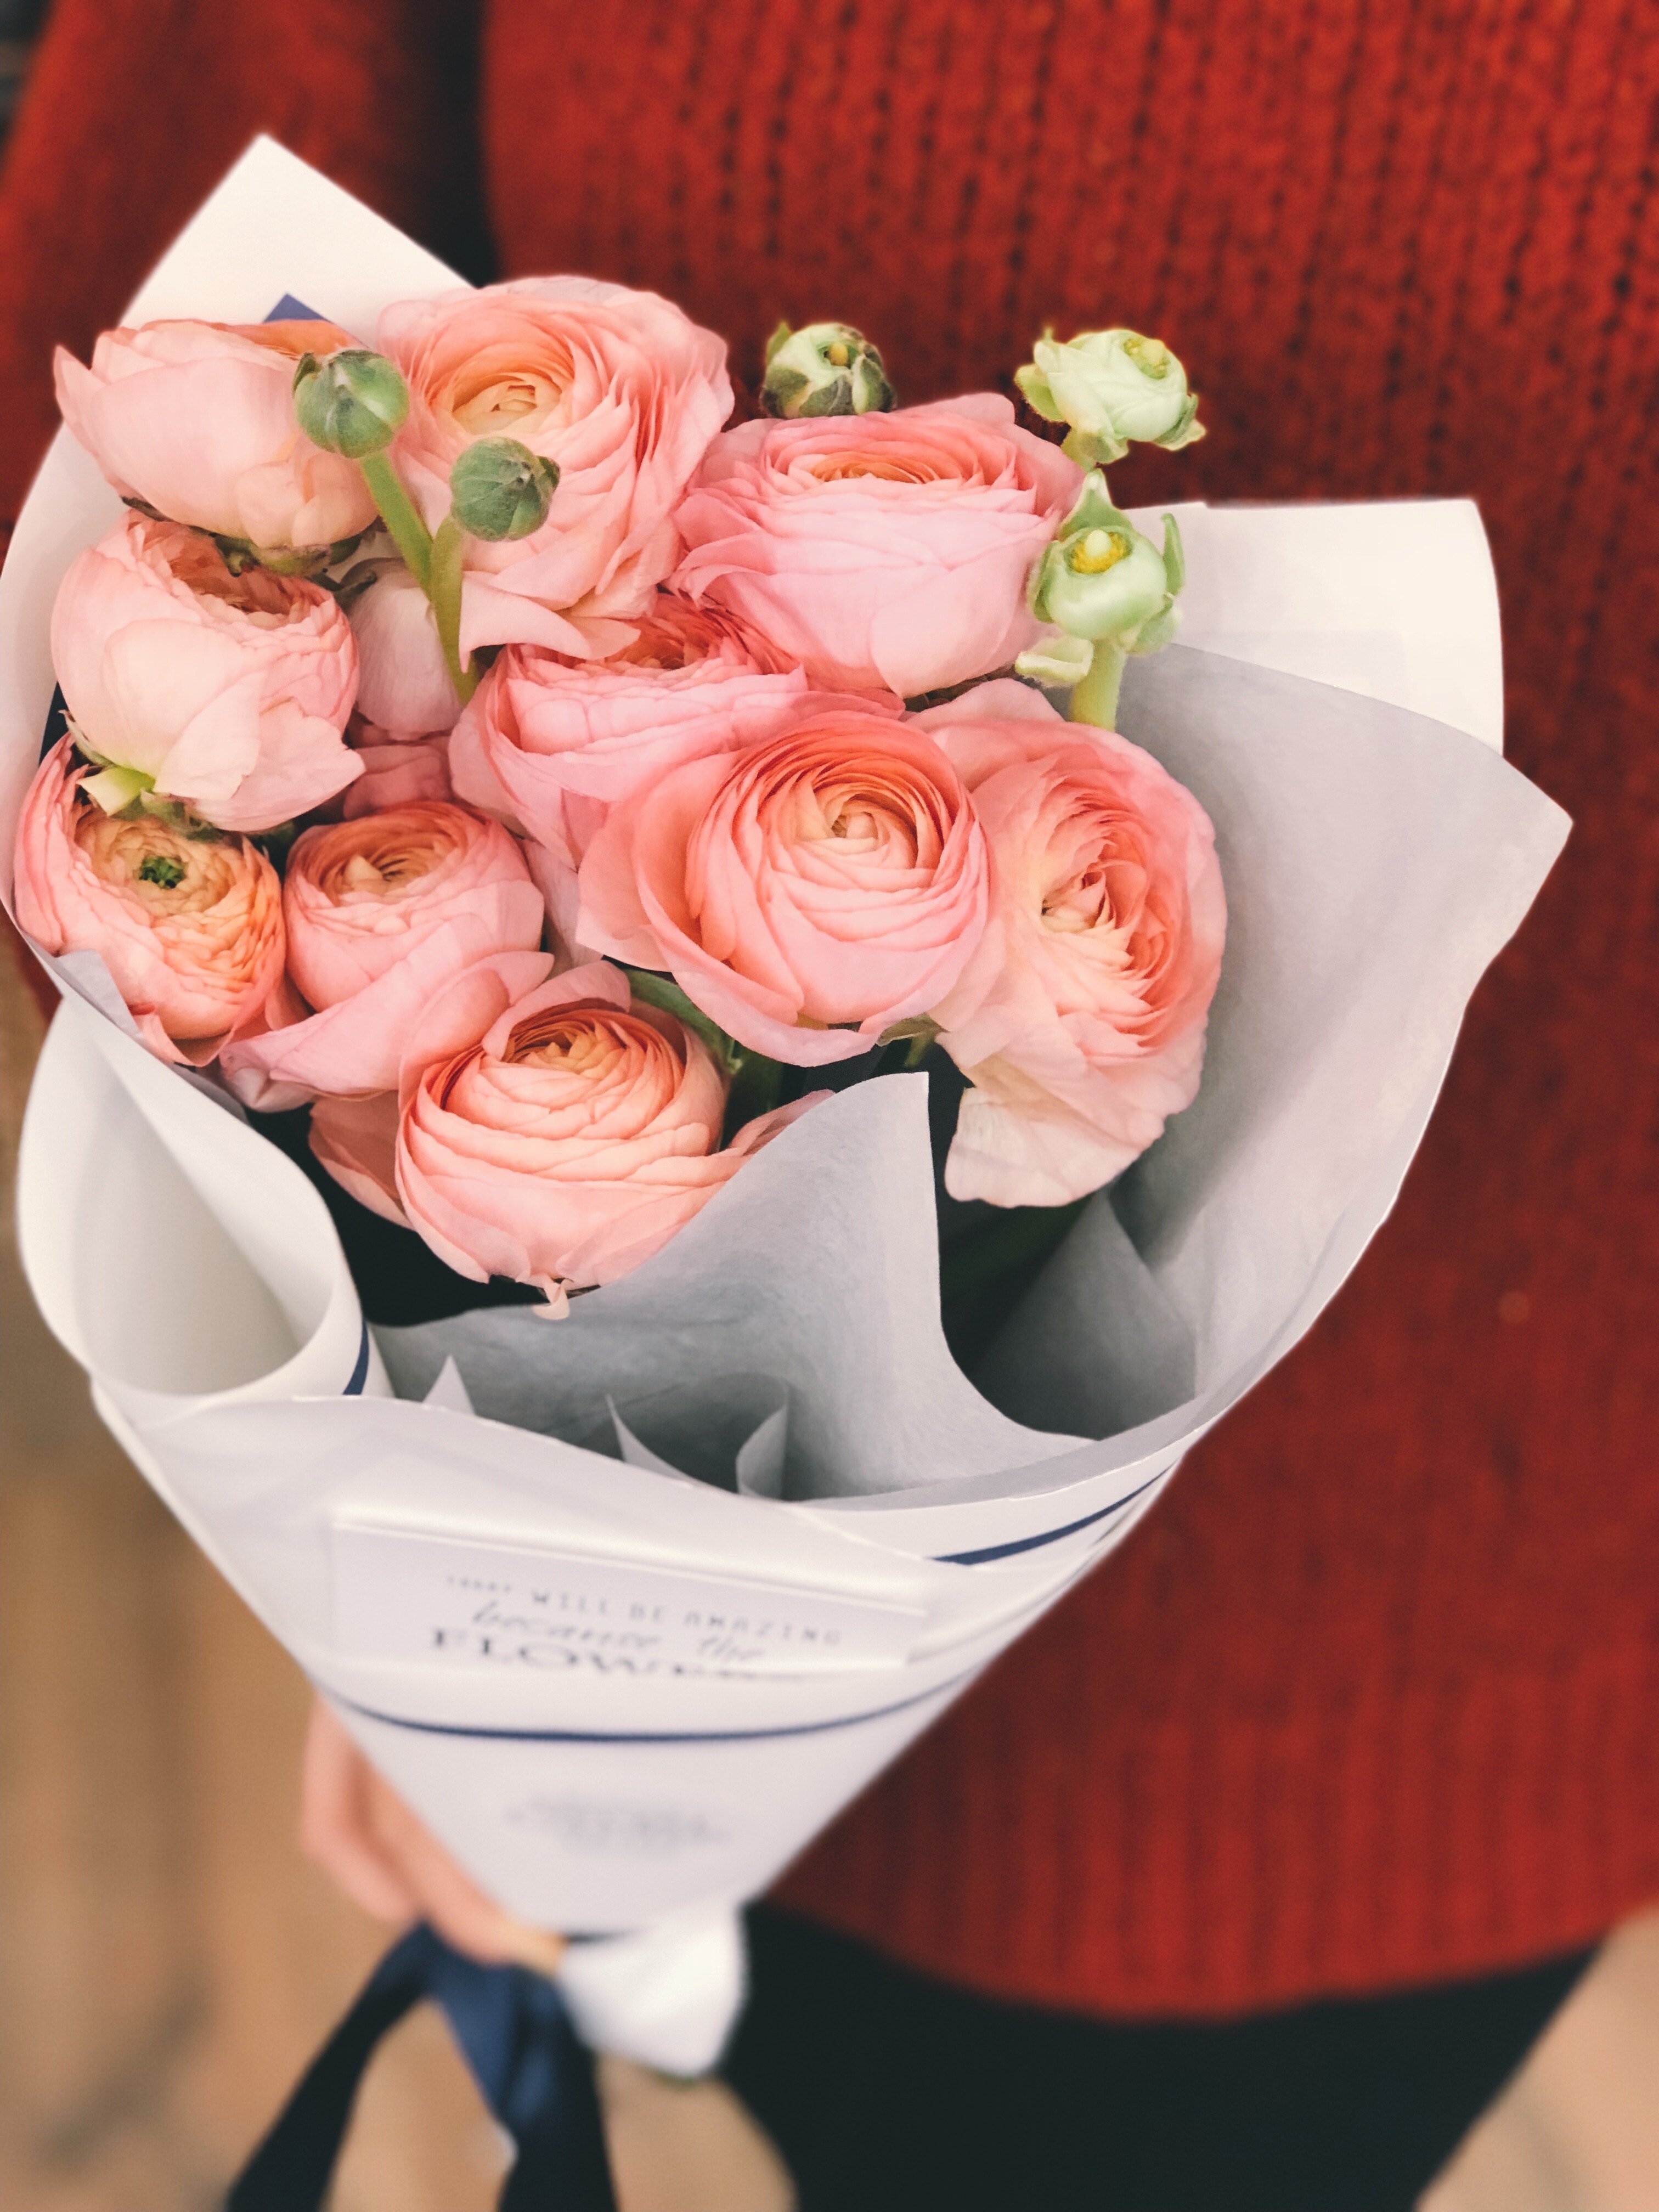 Jim was amazed by the beautiful bouquet Cassy made. | Source: Pexels